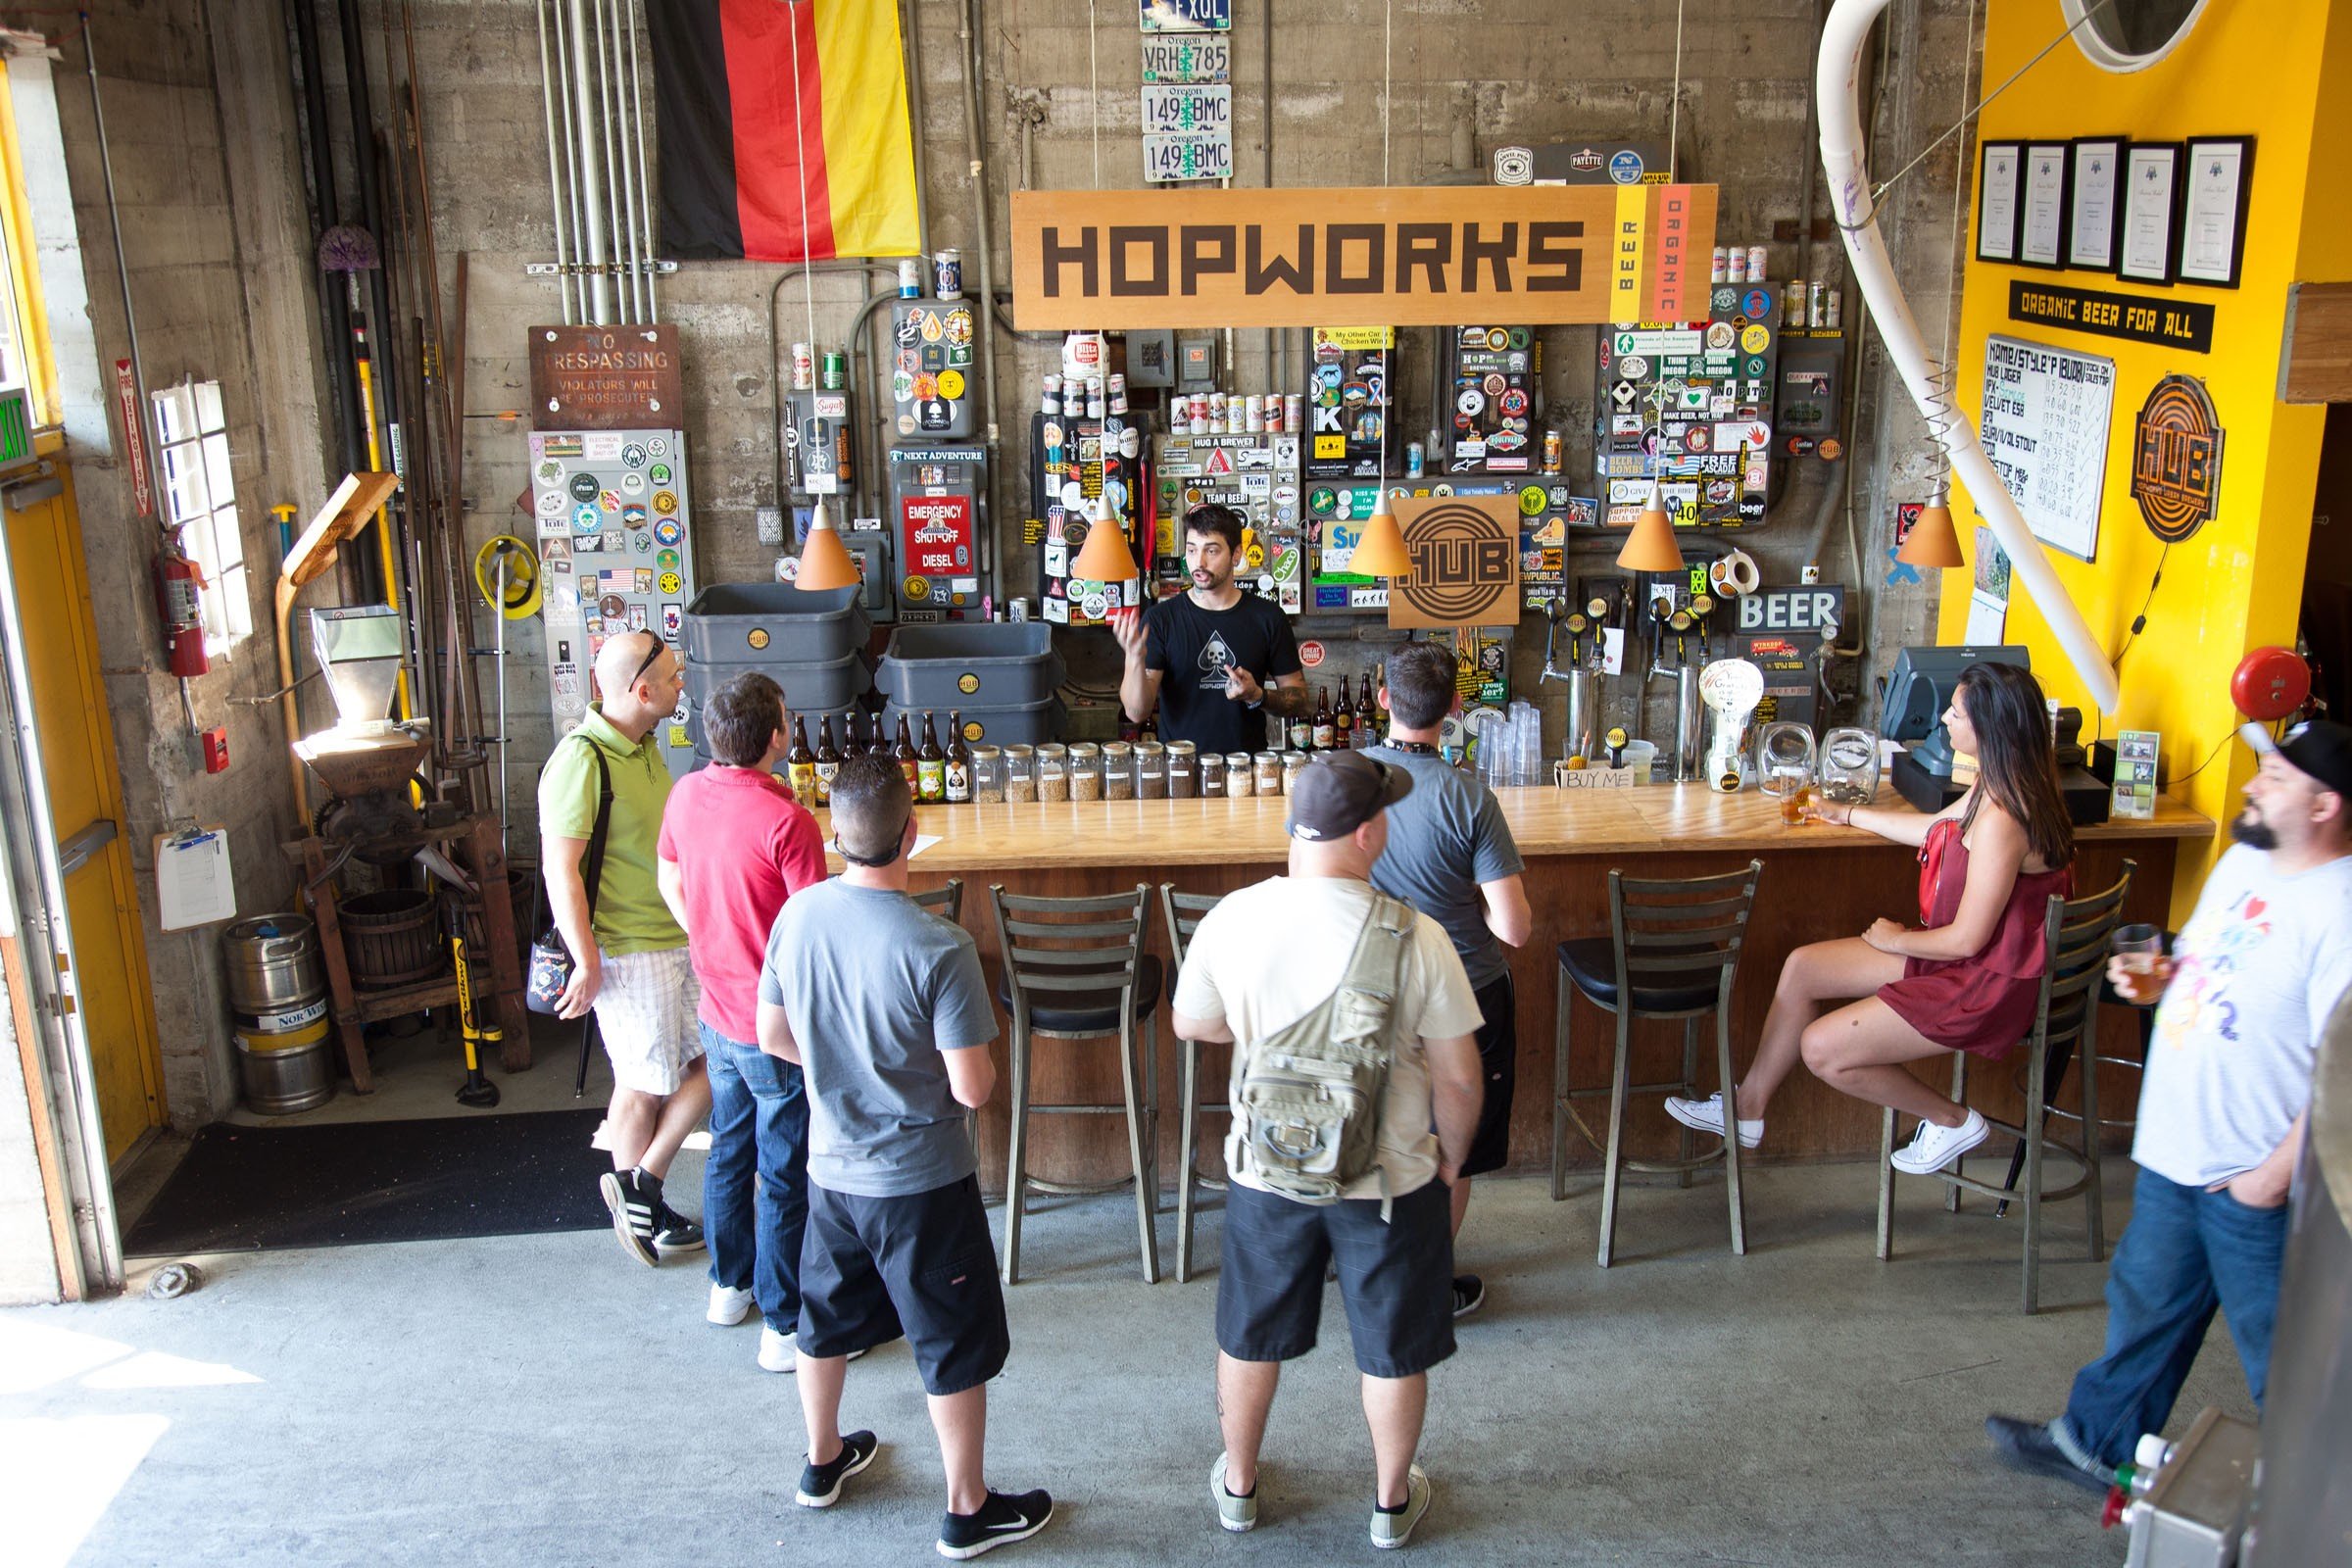 Hopworks Urban Brewery brewery from United States